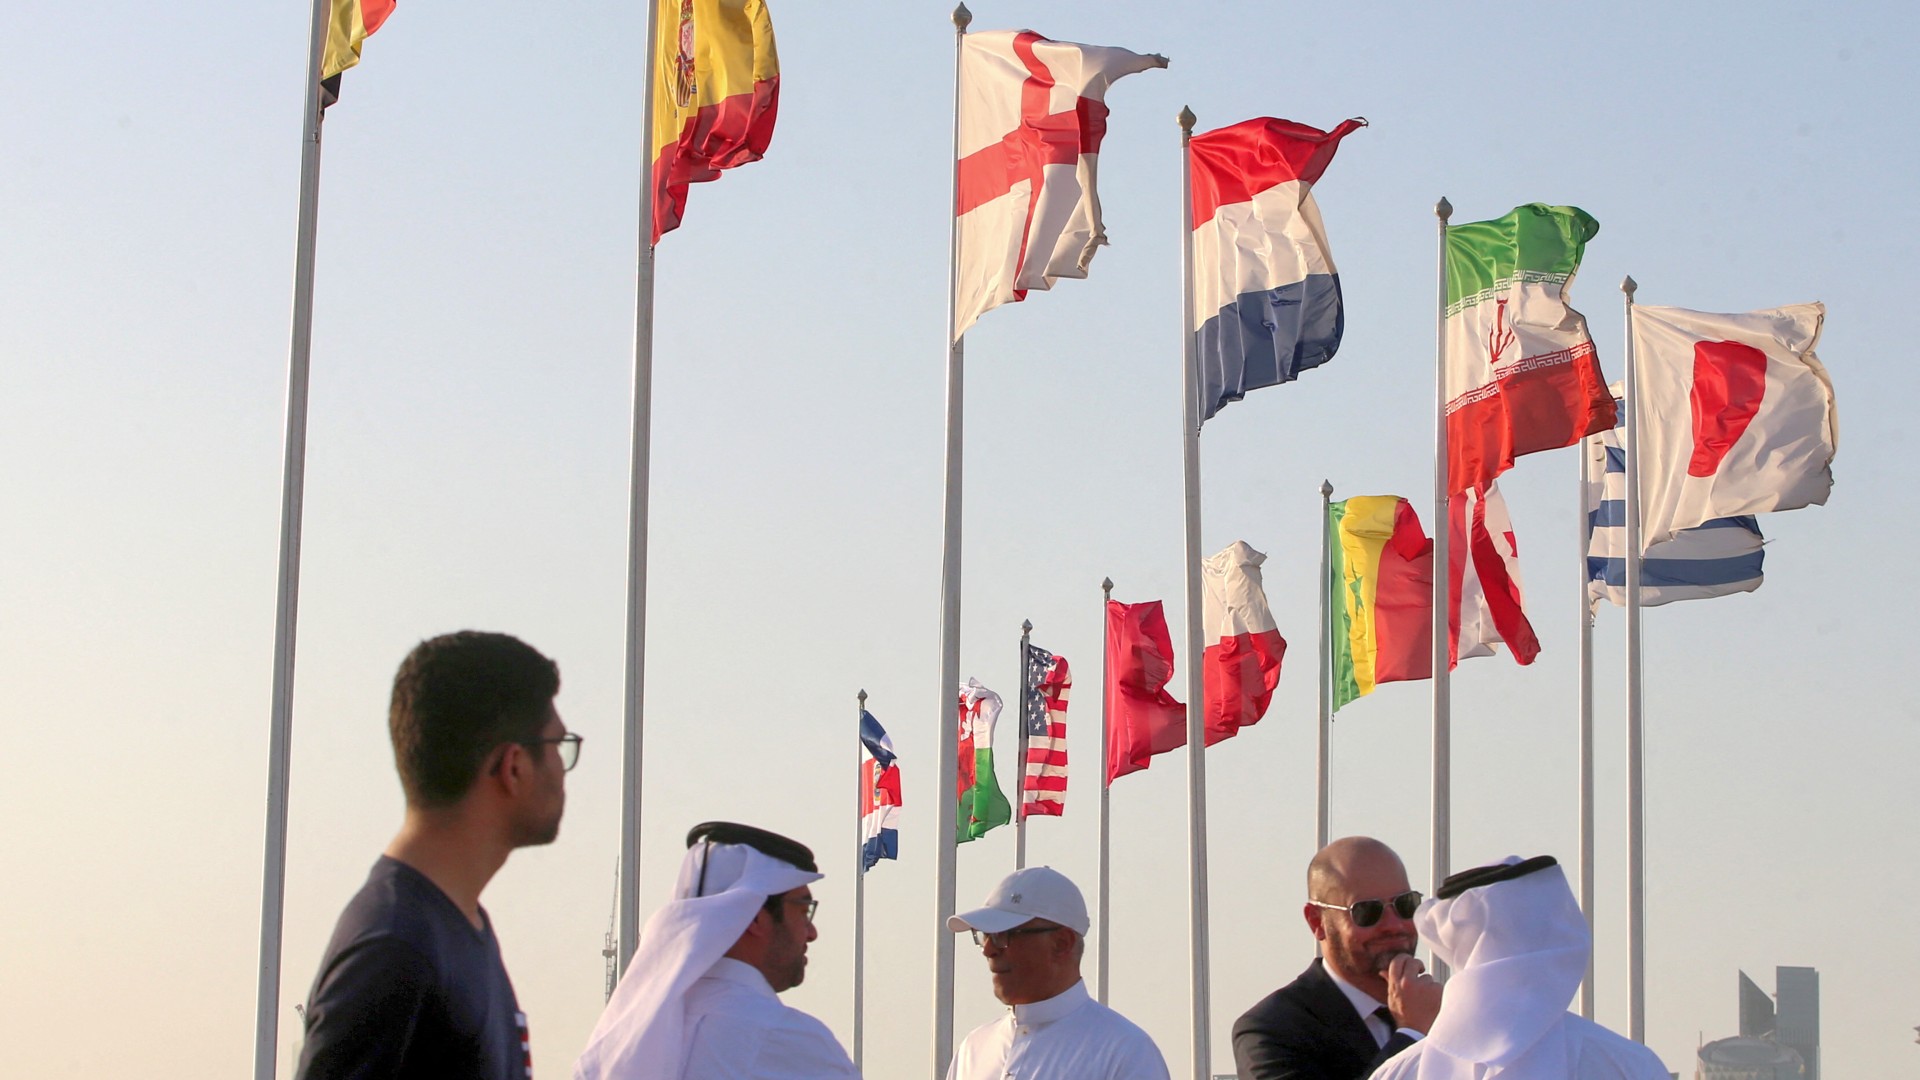 A general view shows flags of the qualified countries for the 2022 World Cup in the Qatari capital Doha during a flag-raising ceremony of the last remaining countries to qualify, on June 16, 2022.